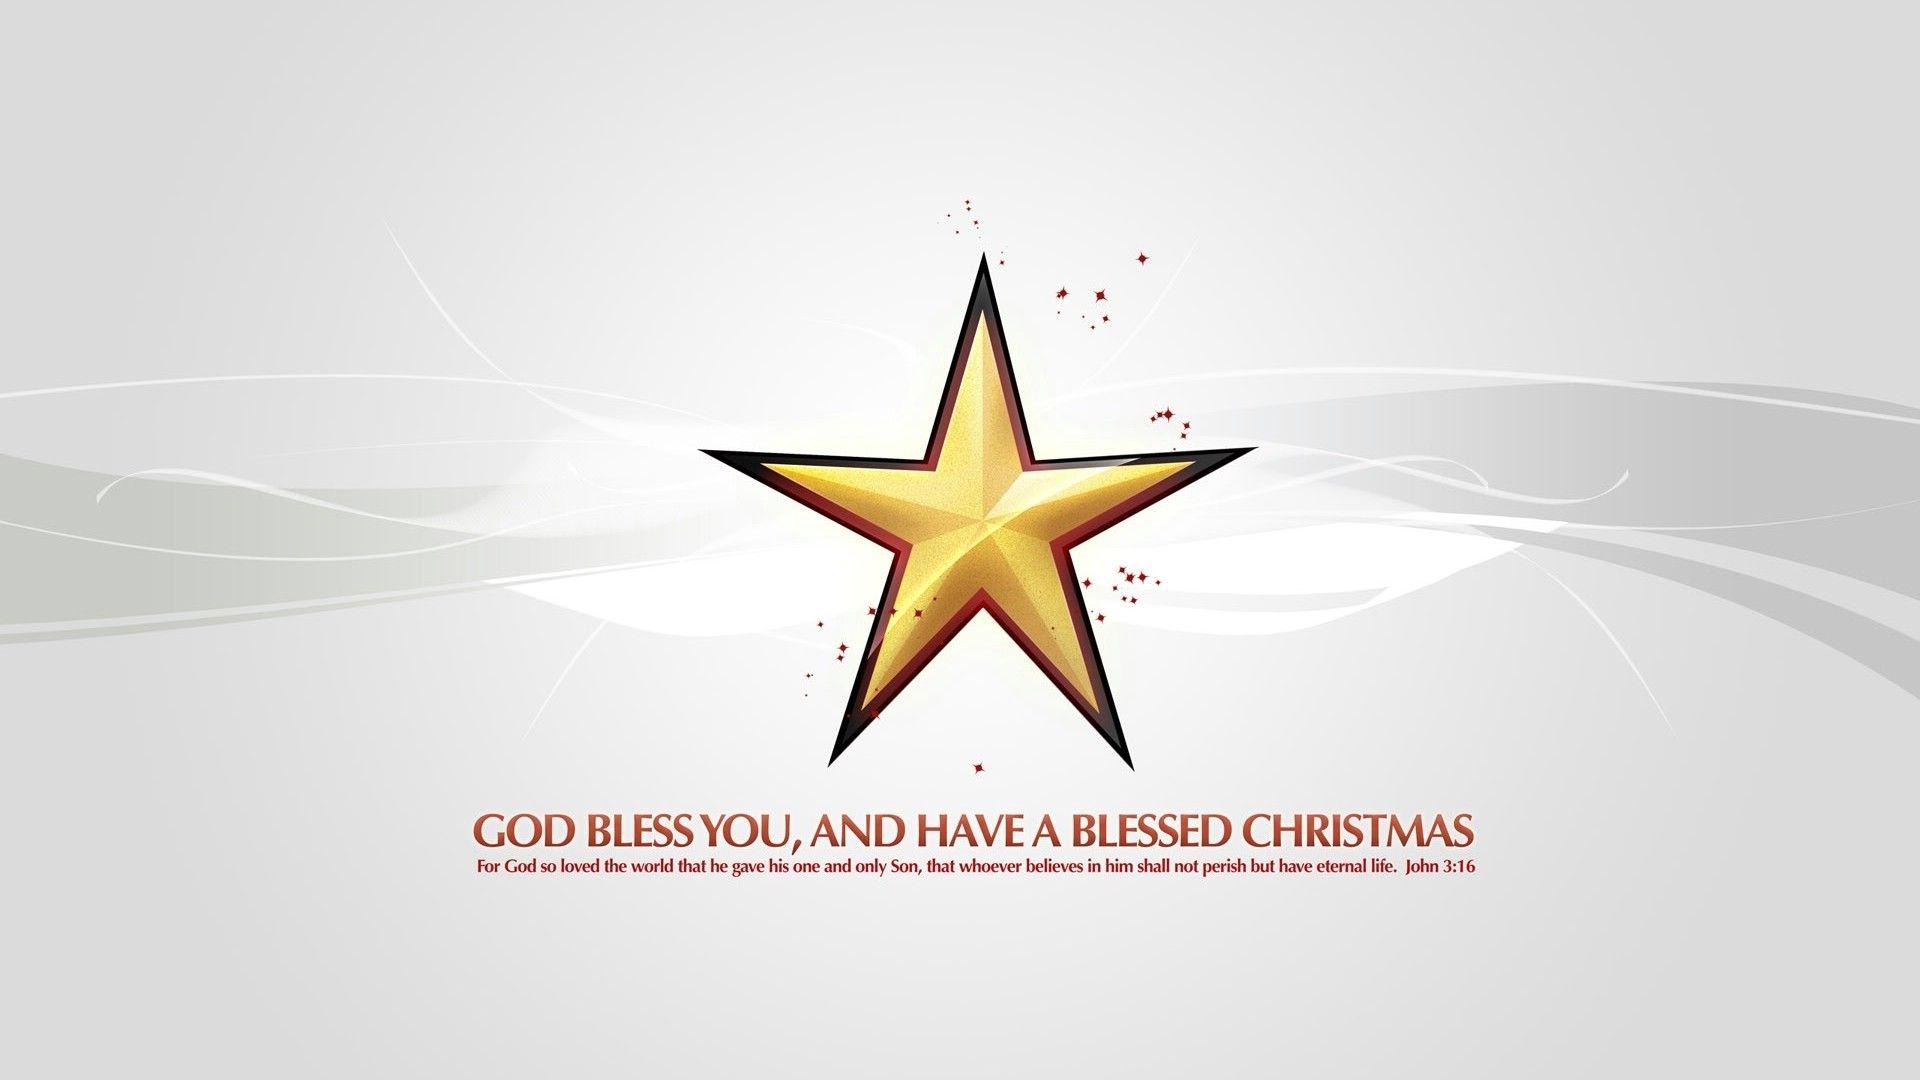 Blessed Christmas Star 1920x1080 (1080p)